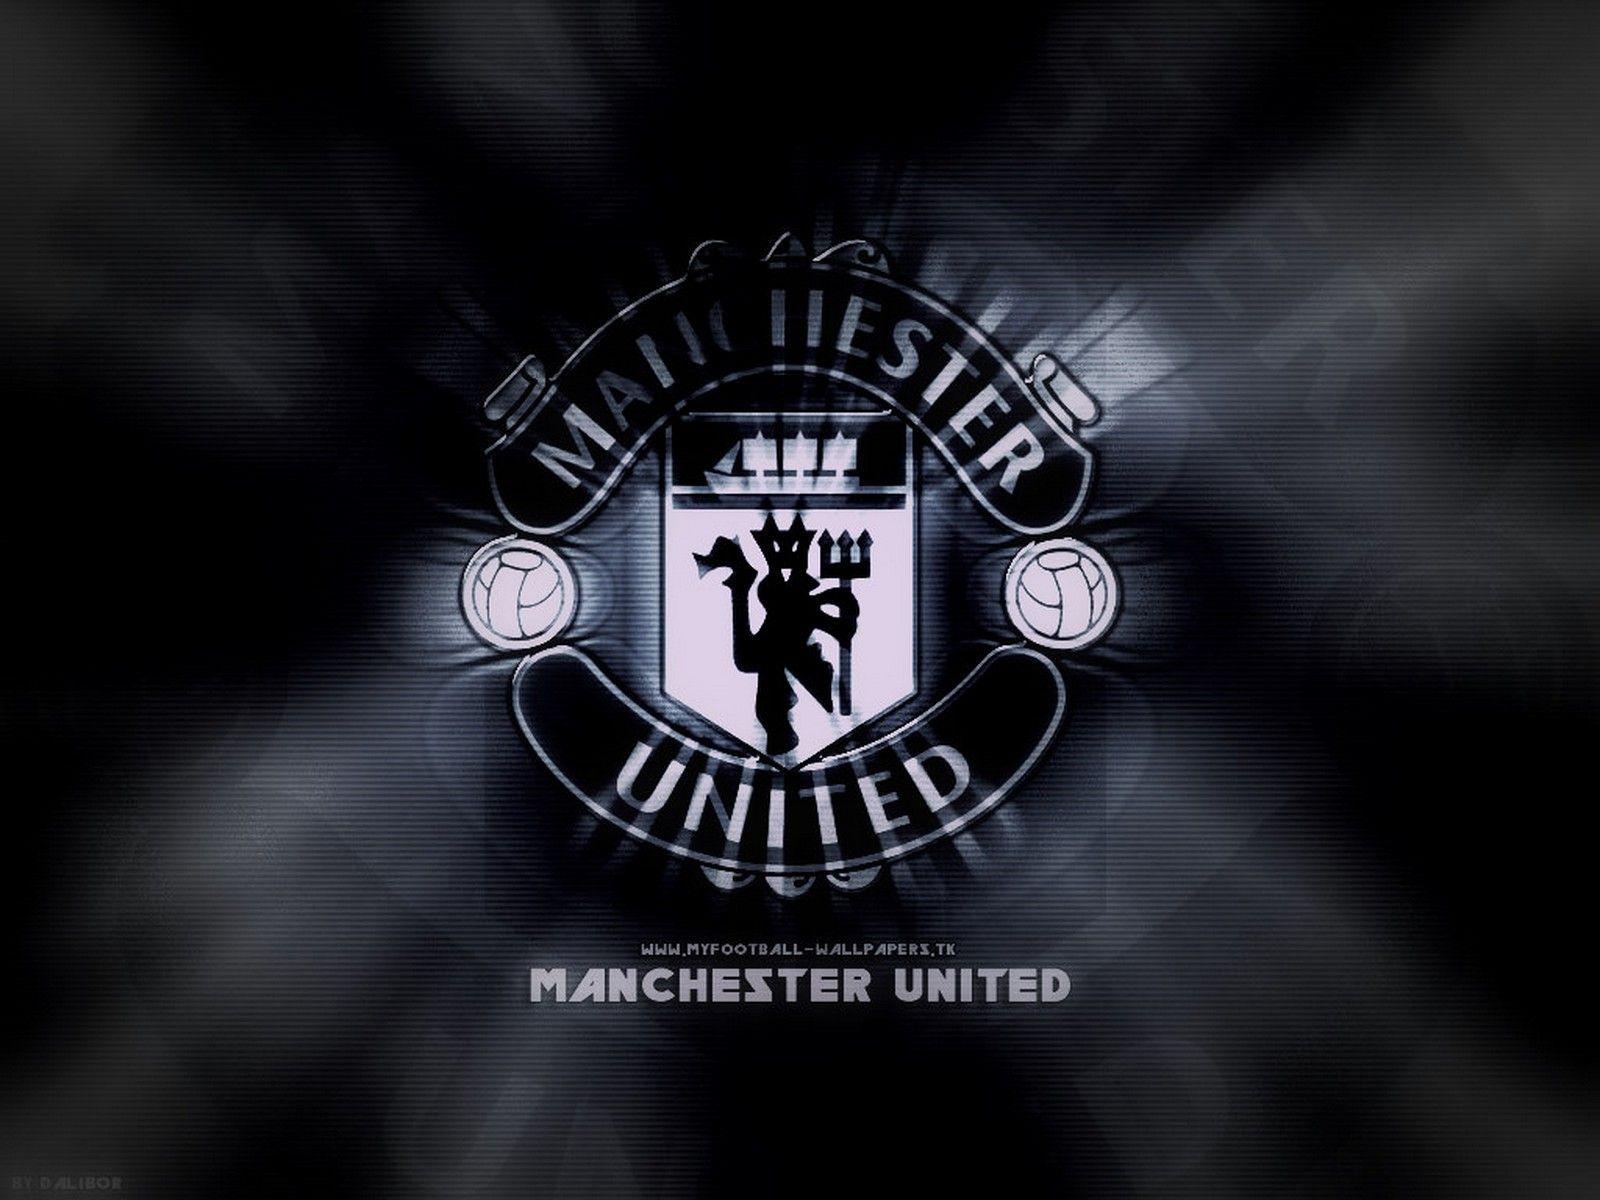 Manchester United Black Logo Wallpaper by DALIBOR. Manchester united logo, Manchester united wallpaper, Manchester united